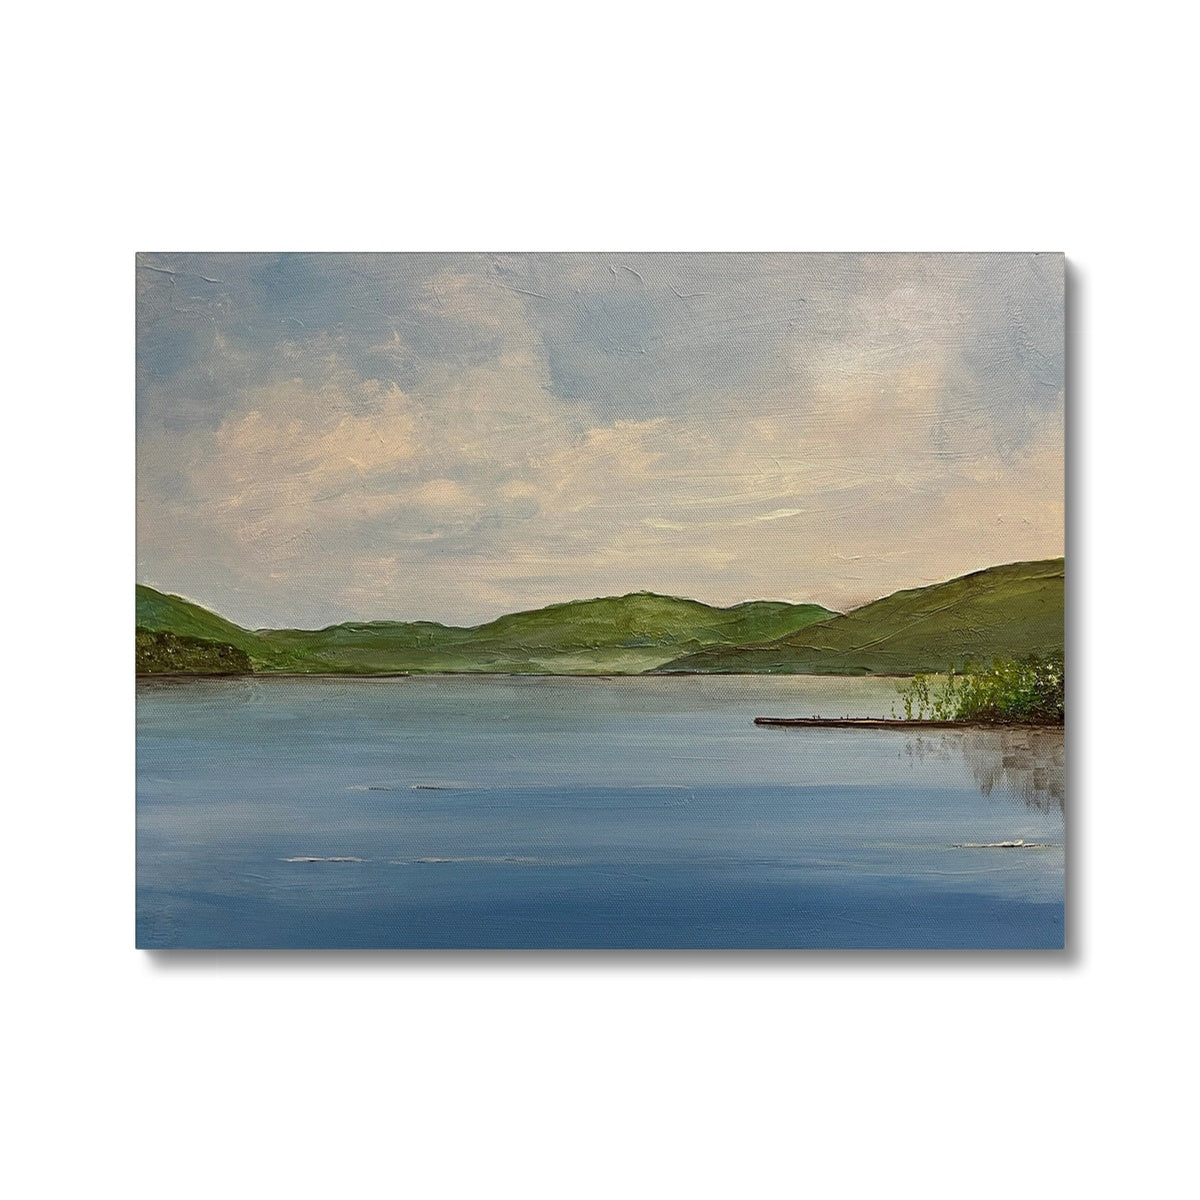 Loch Tay ii Painting | Canvas From Scotland-Contemporary Stretched Canvas Prints-Scottish Lochs & Mountains Art Gallery-24"x18"-Paintings, Prints, Homeware, Art Gifts From Scotland By Scottish Artist Kevin Hunter